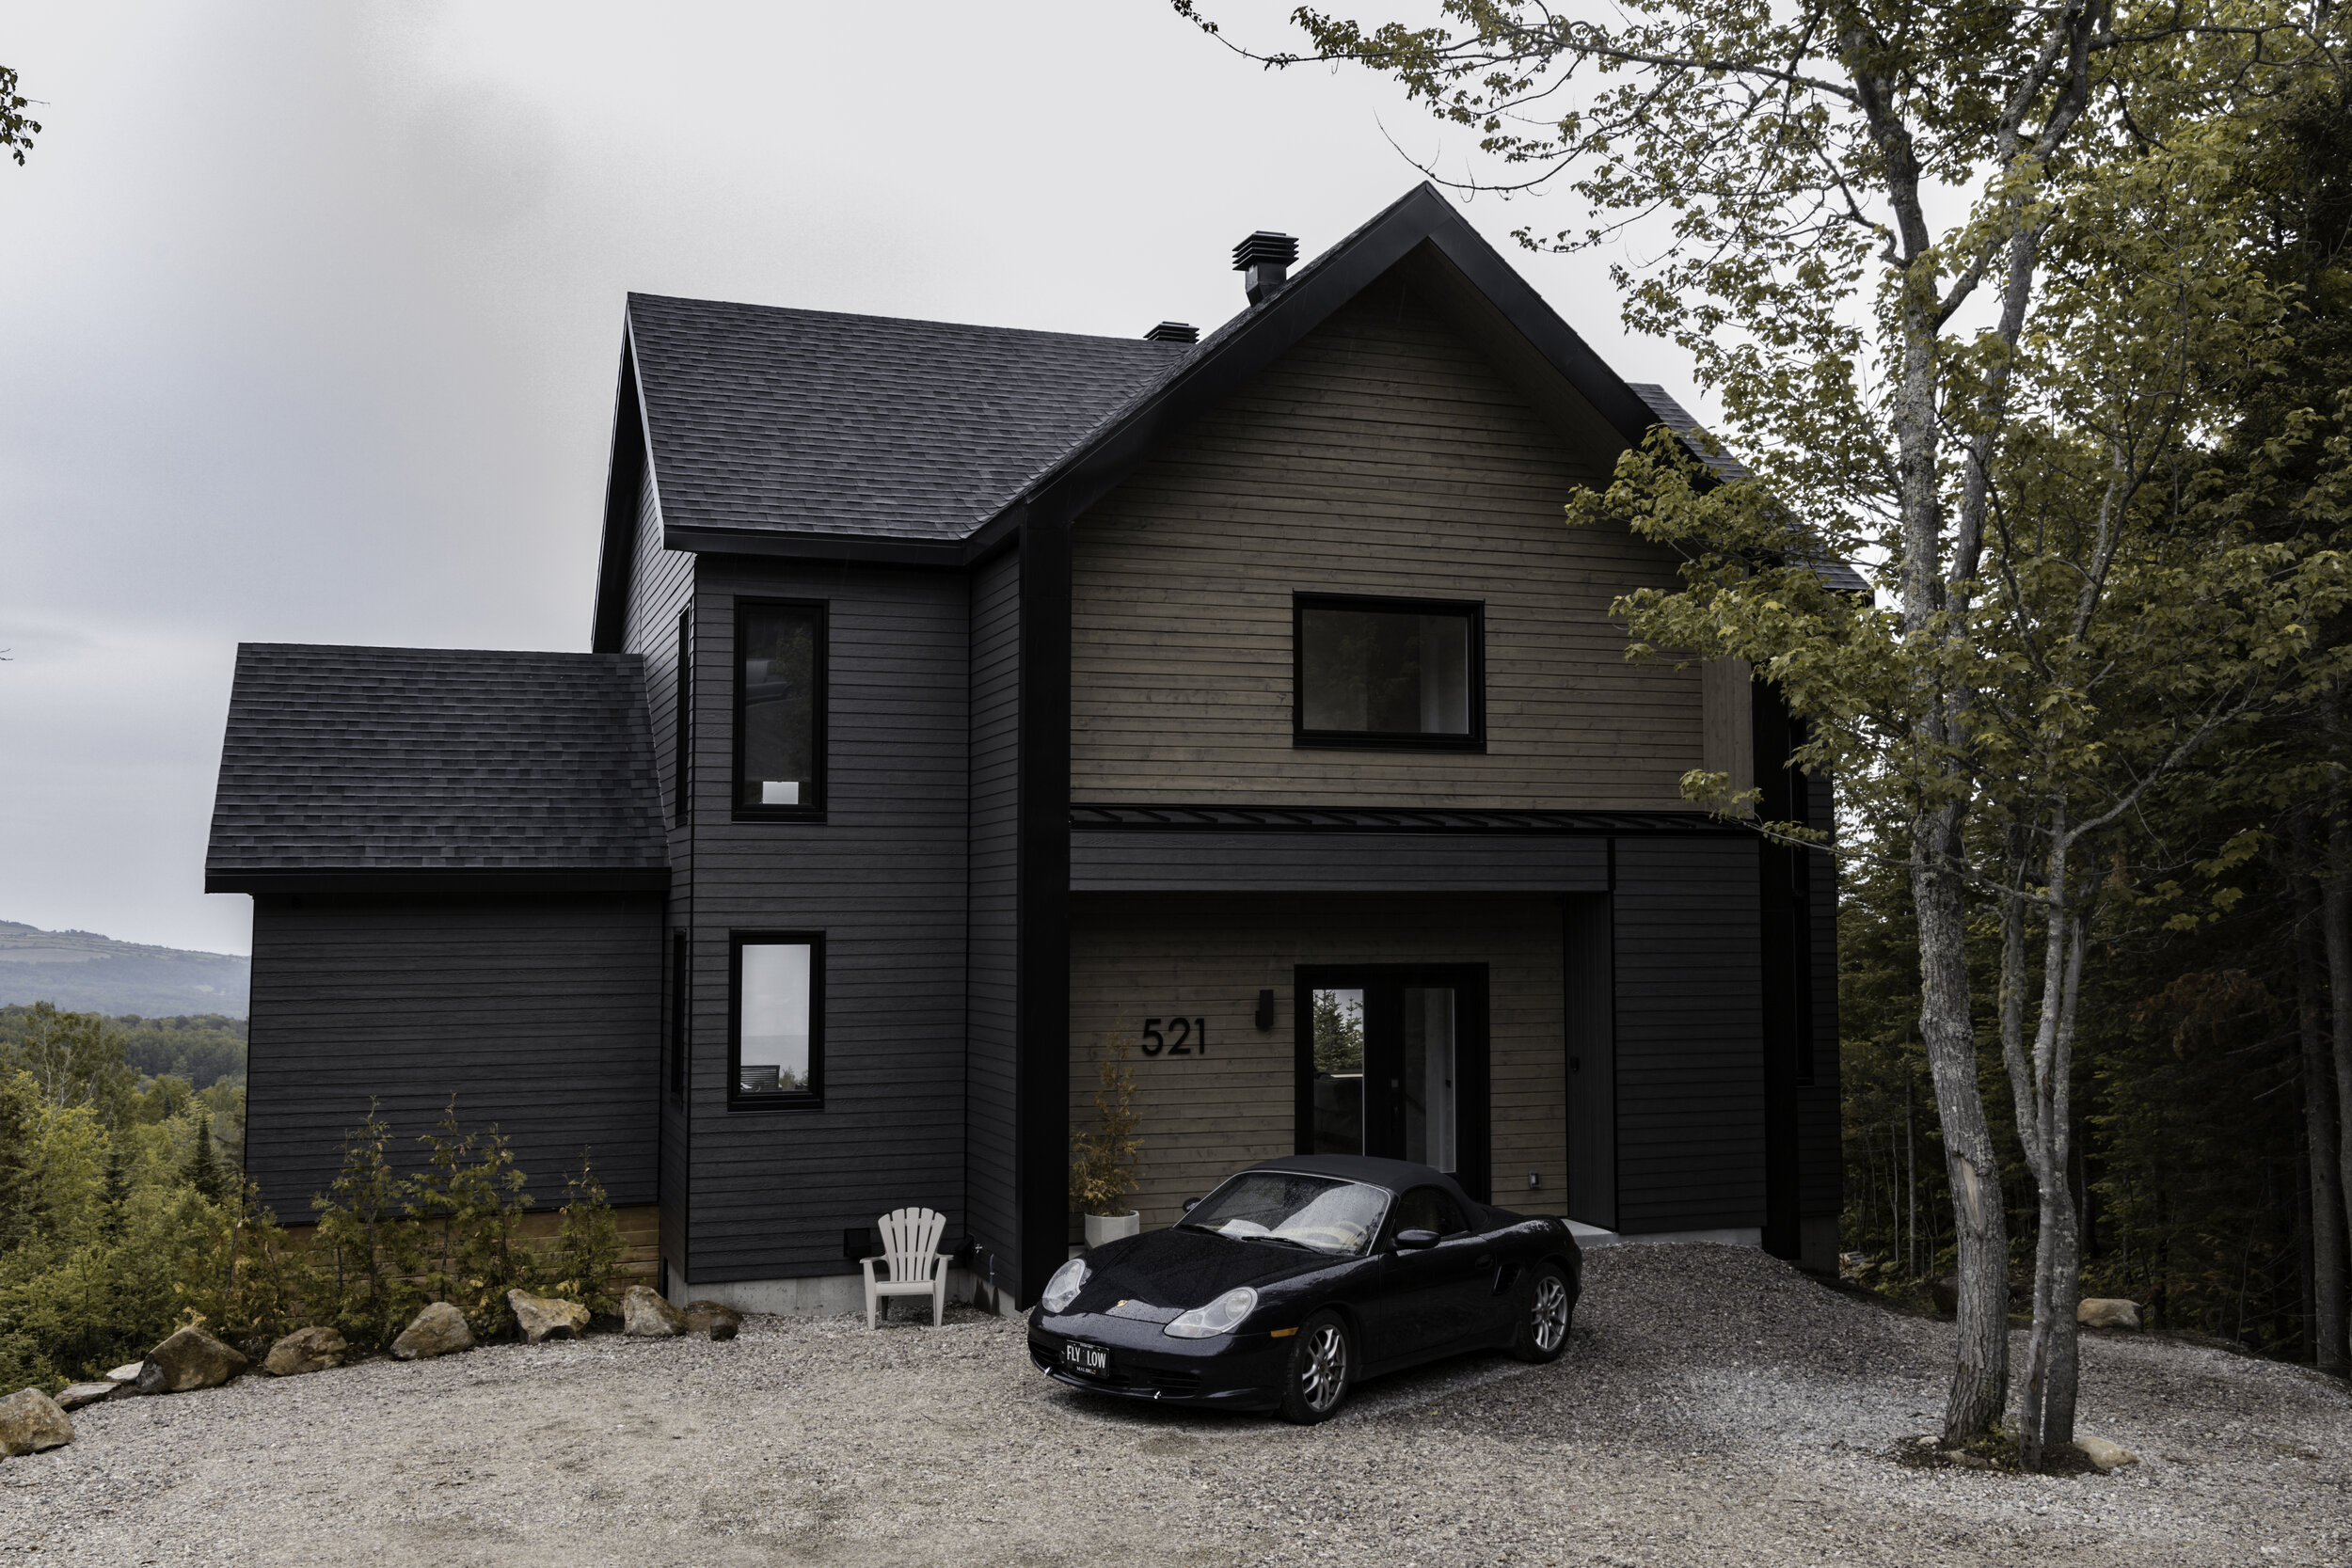 Large luxury chalet in Quebec (Charlevoix Region) with a Porsche car parked out front